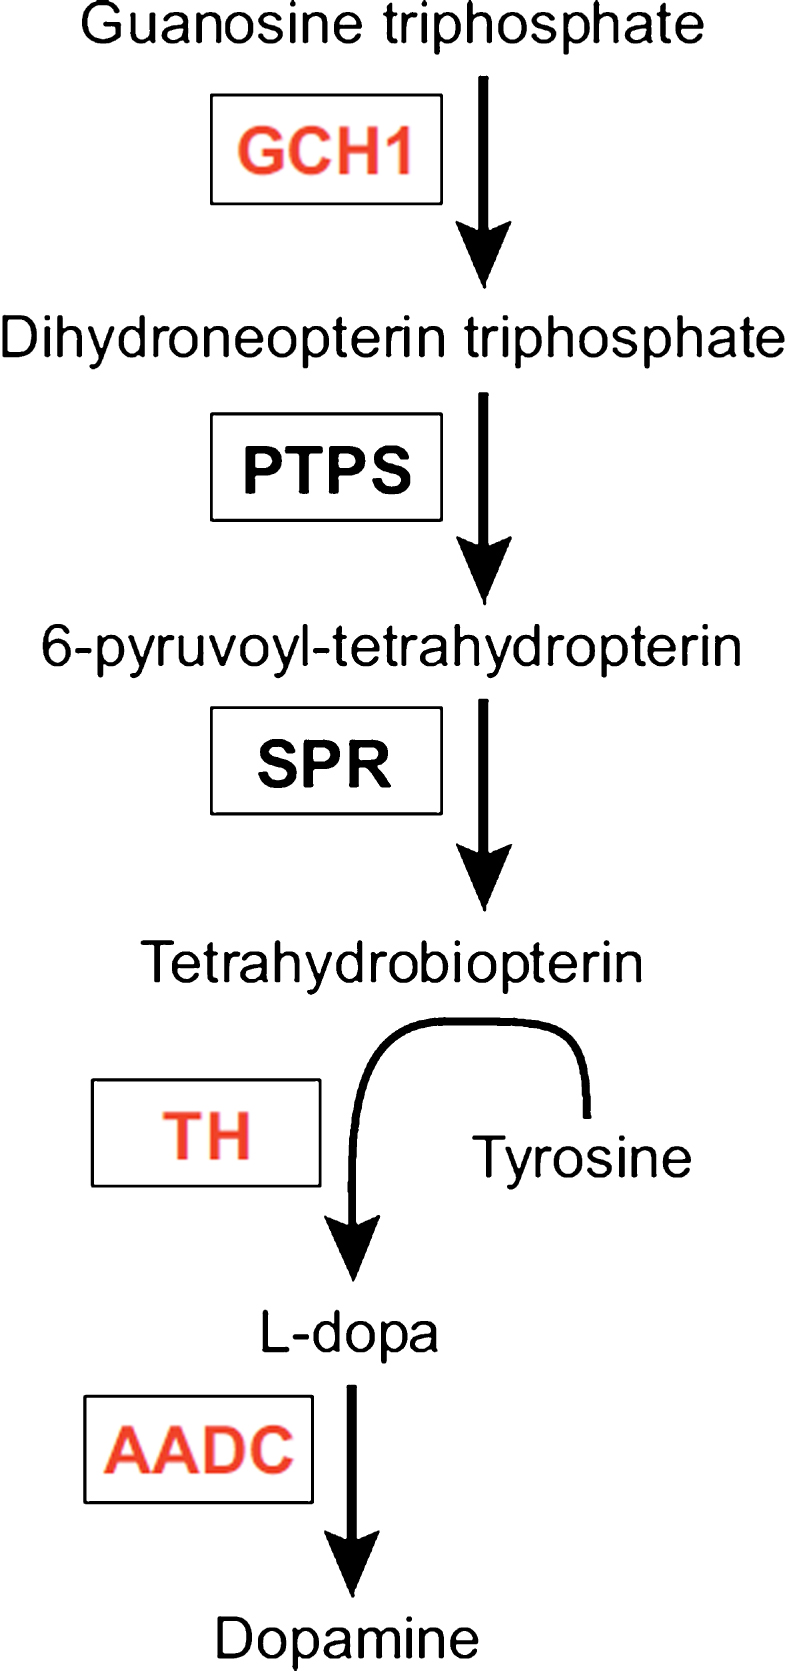 L-tyrosine is converted to L-dihydroxyphenylalanine (L-DOPA) by tyrosine hydroxylase (TH) using the co-factor tetrahydrobiopterin, under the rate limit of GTP cyclohydroxylase 1 (GCH1). L-DOPA is further converted into dopamine by alpha-amino acid decarboxylase (AADC). The three enzymes in red are encoded by Prosavin gene therapy. PTPS: pyruvoyltetrahydropterin synthase; SPR: sepiapterin reductase.